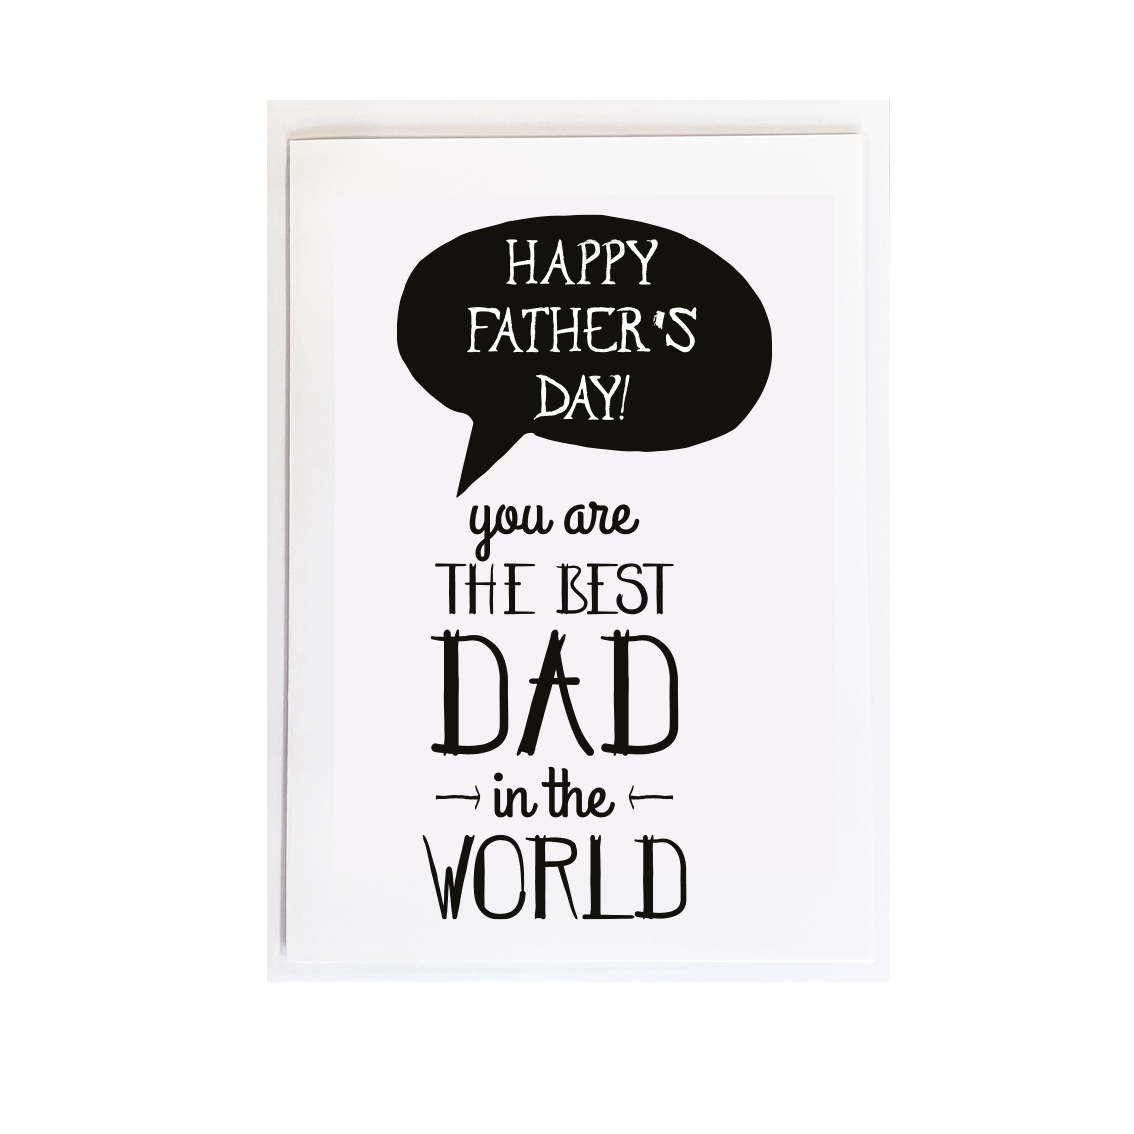 You are the best dad in the world Father's Day Card